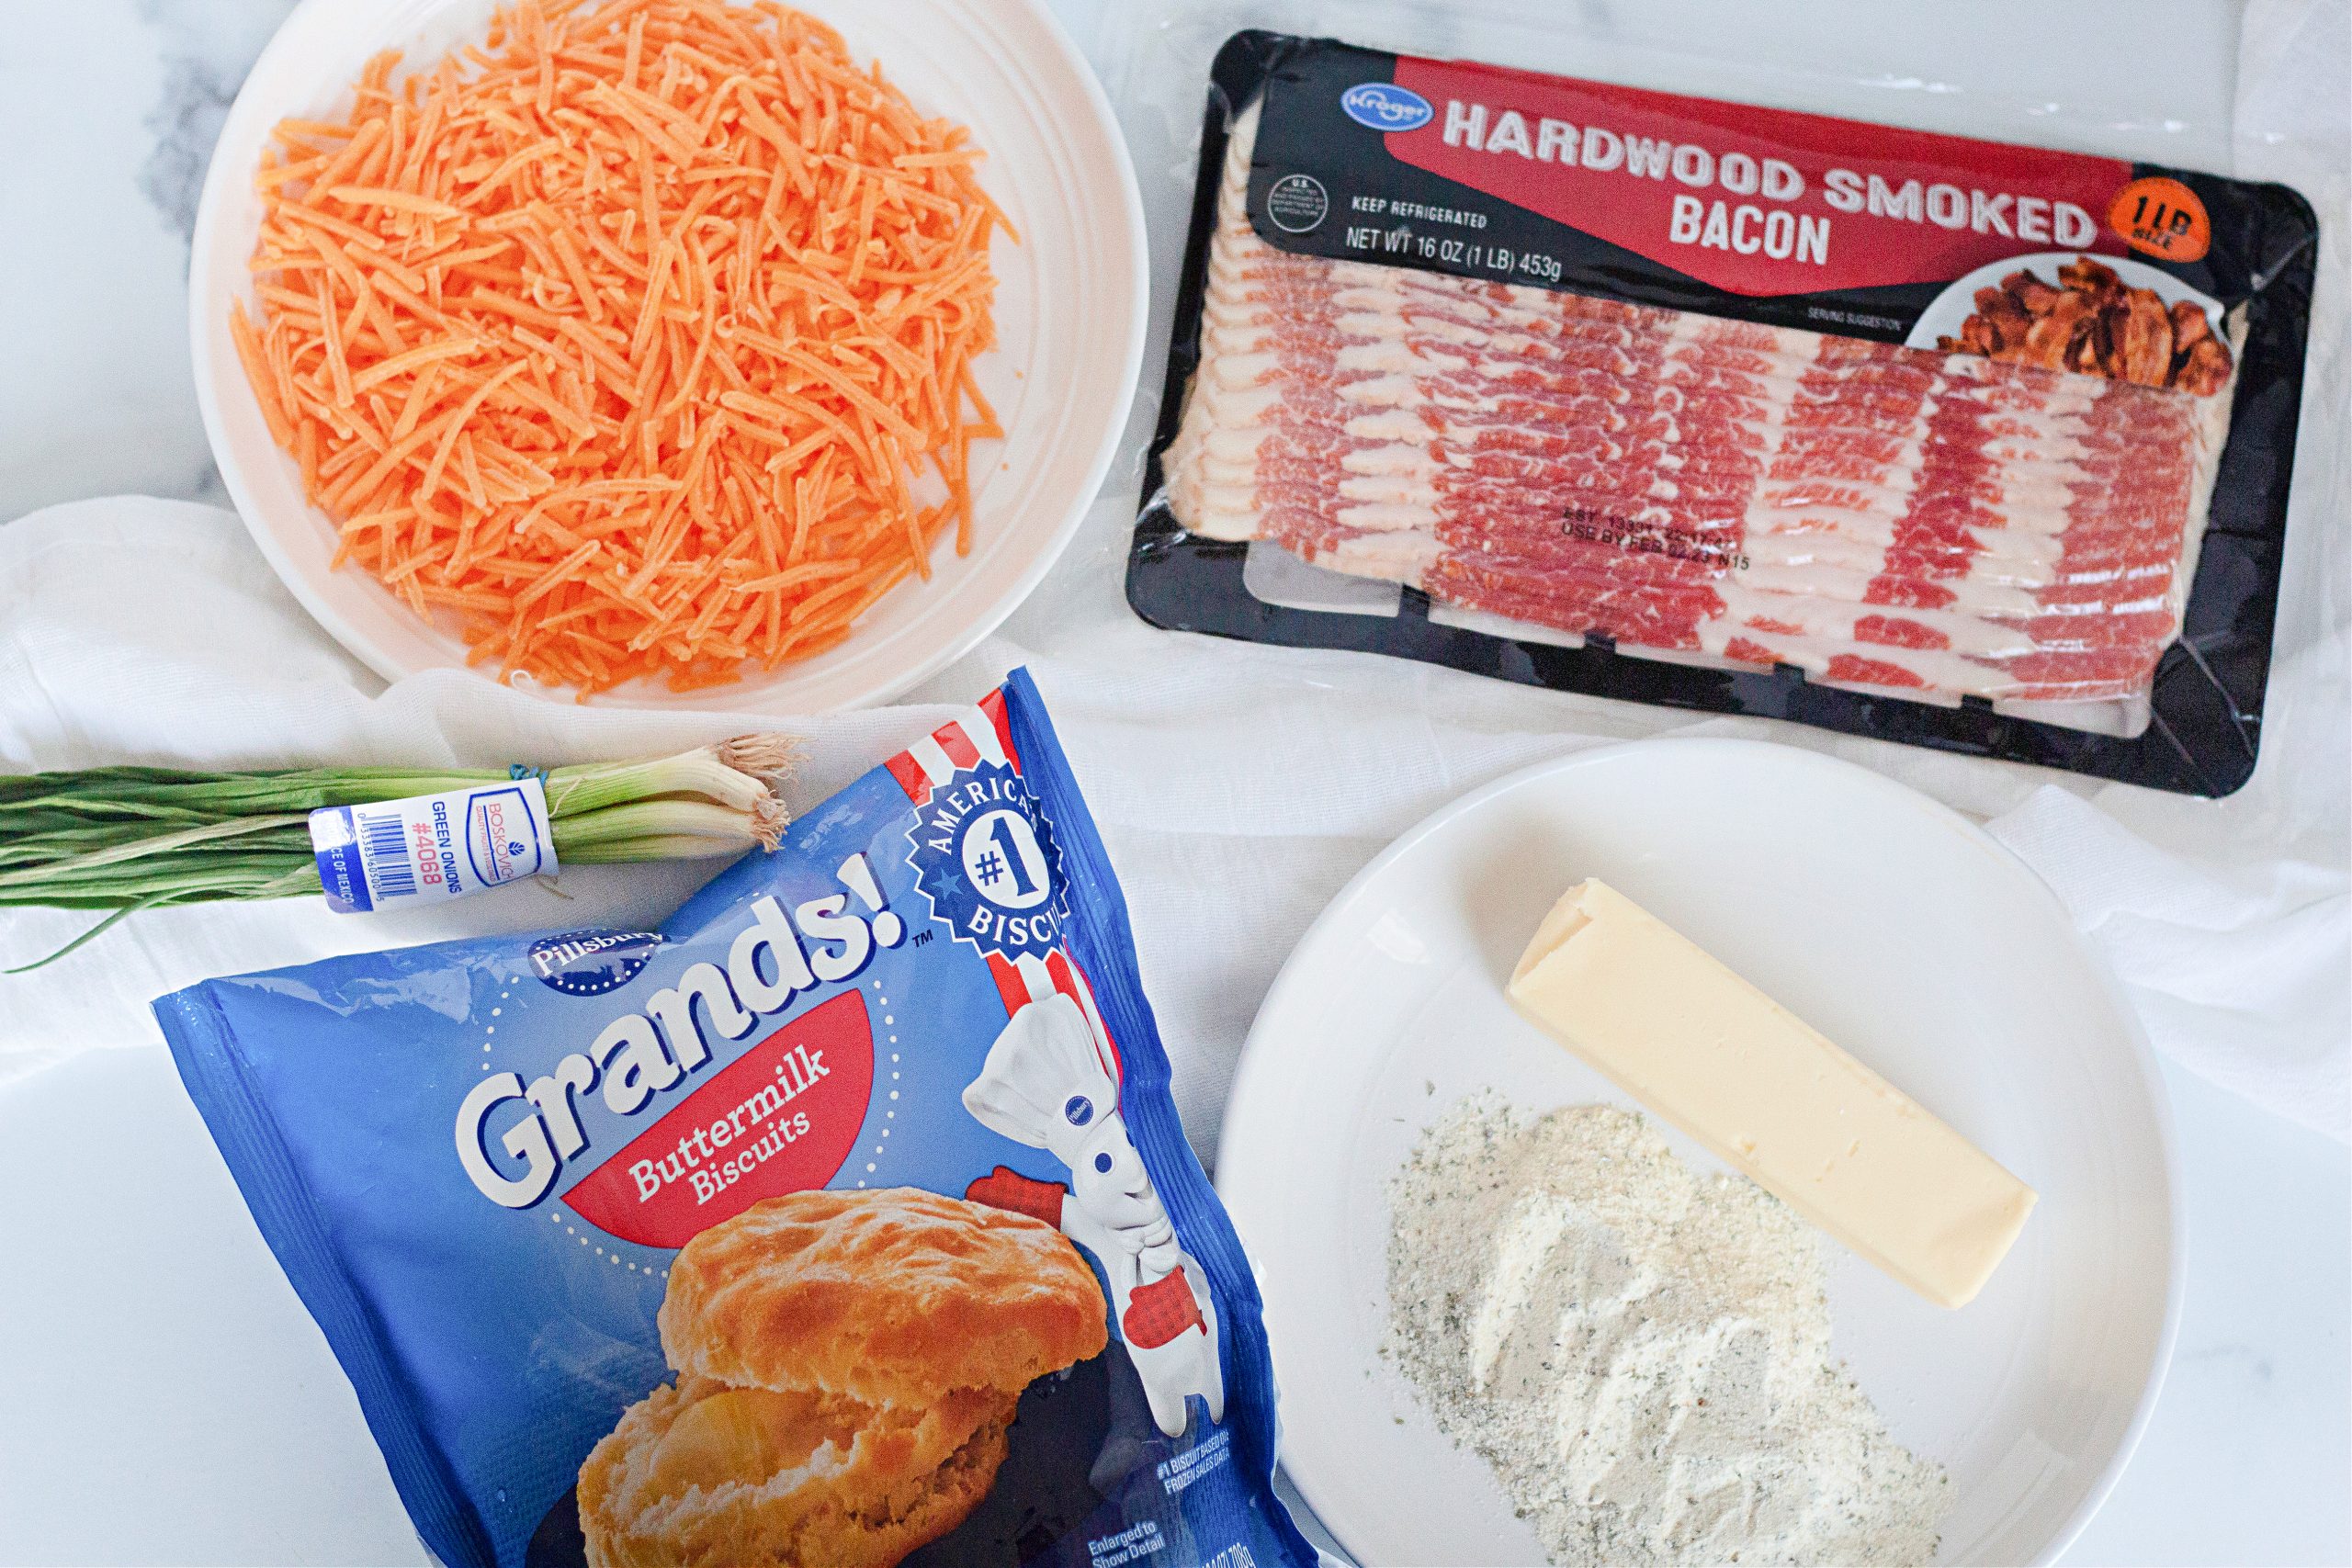 Flay lay photo of shredded cheese, Grands biscuits, butter, and bacon.